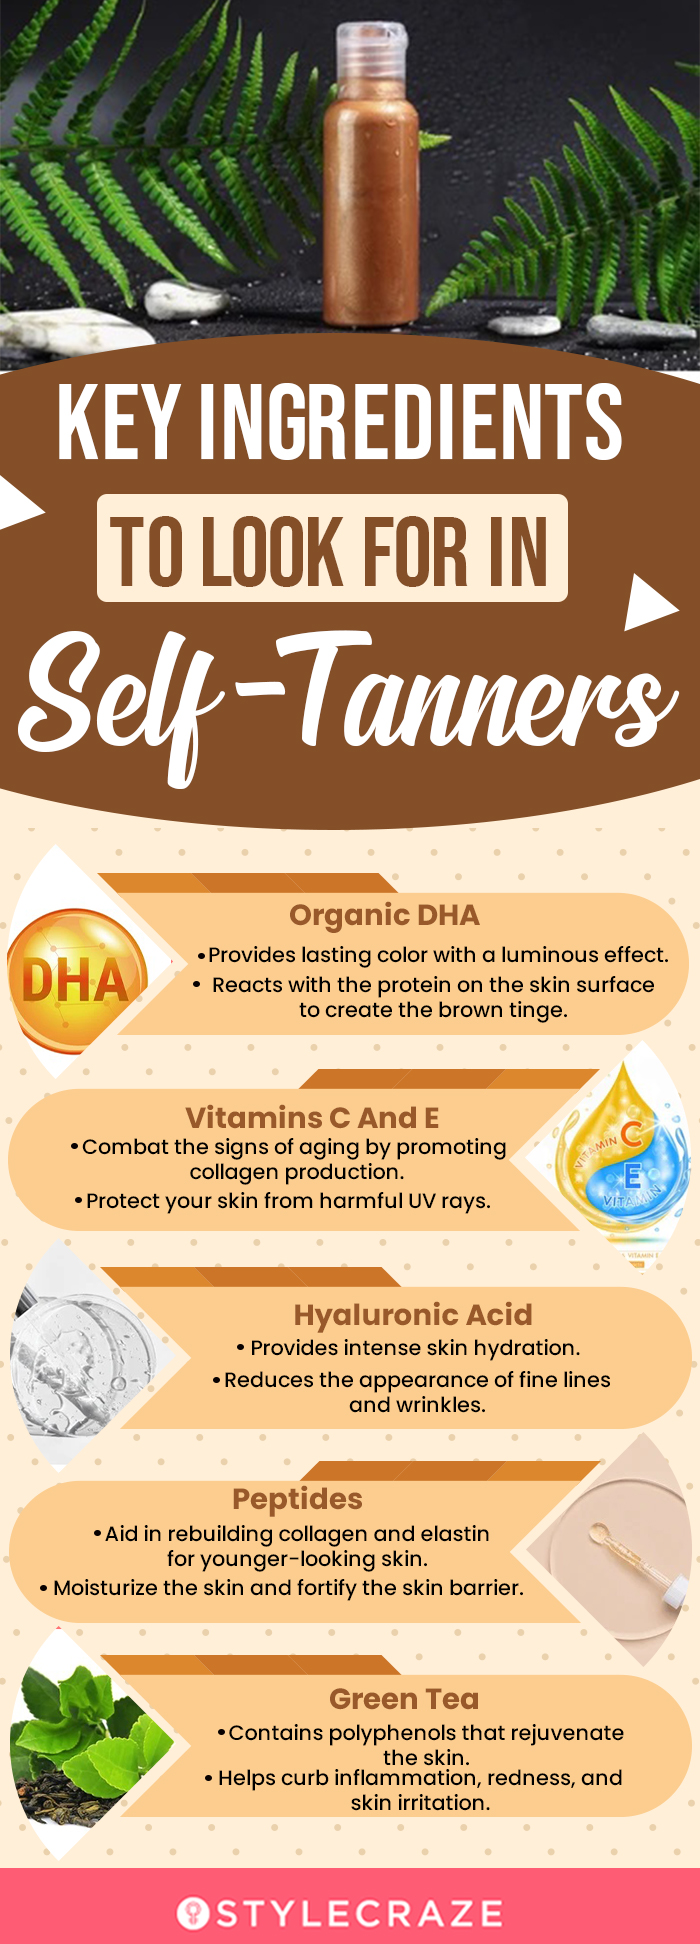 Key Ingredients To Look For In Self-Tanners(infographic)